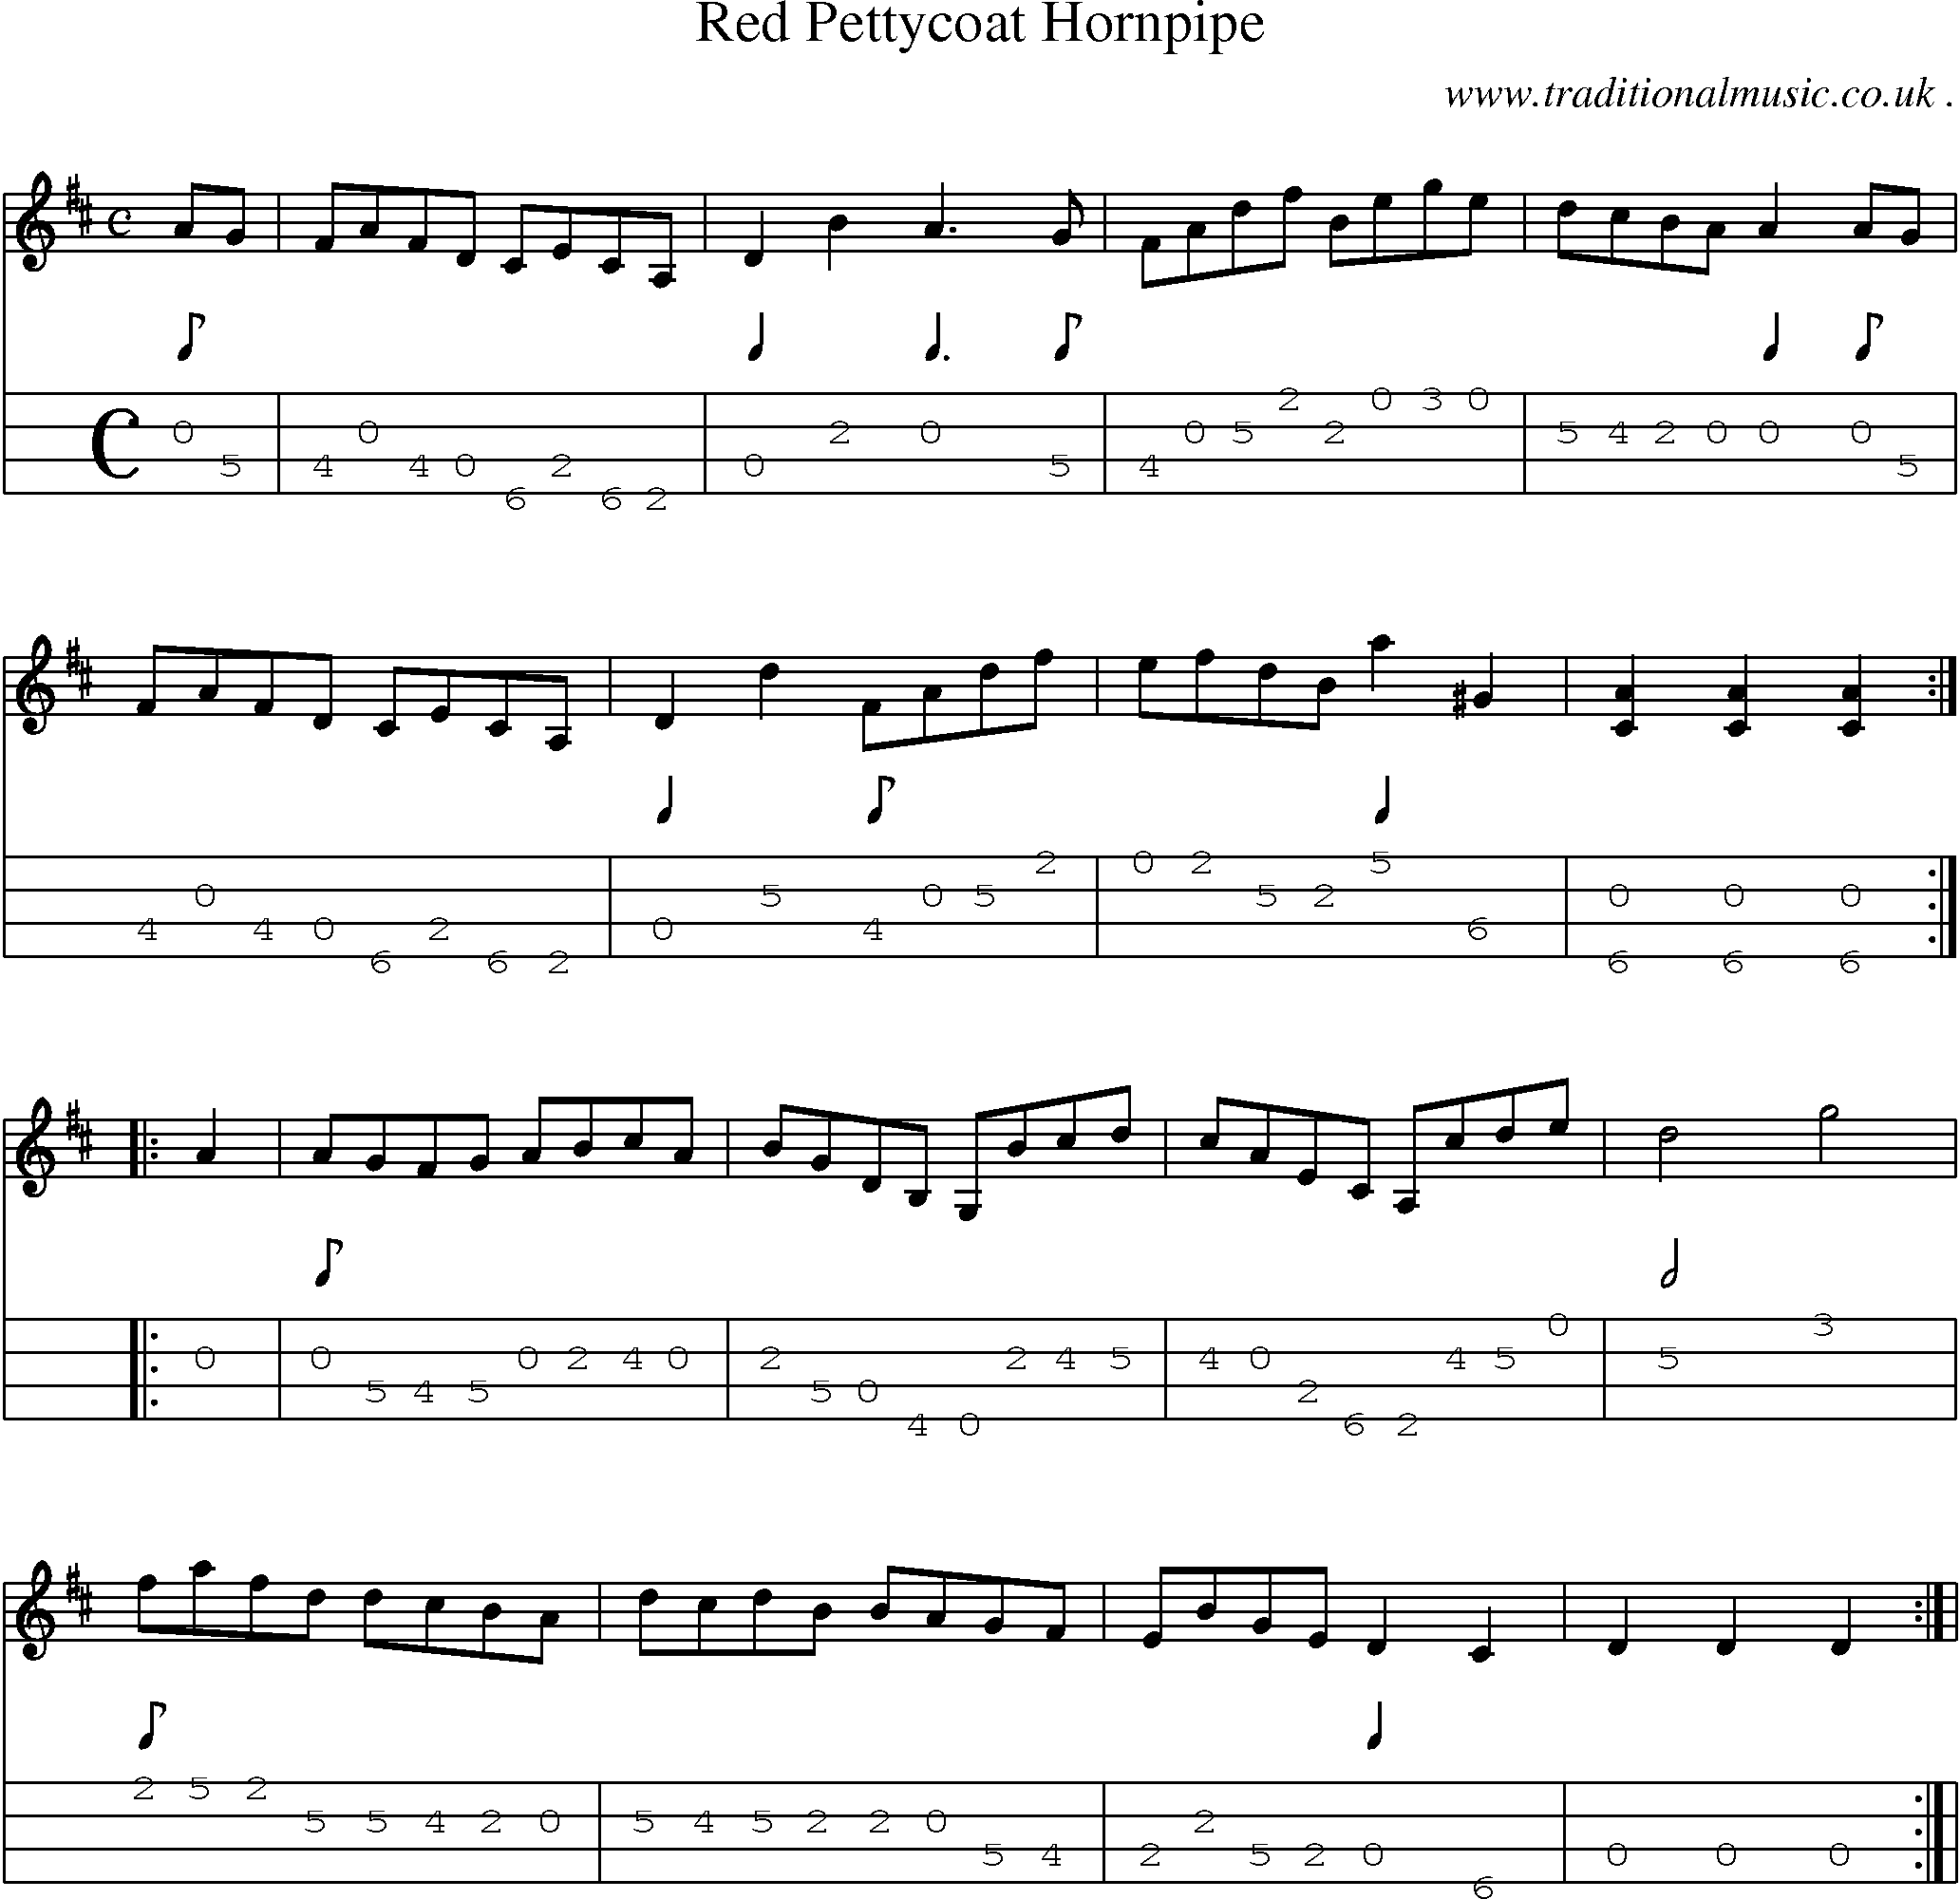 Sheet-Music and Mandolin Tabs for Red Pettycoat Hornpipe